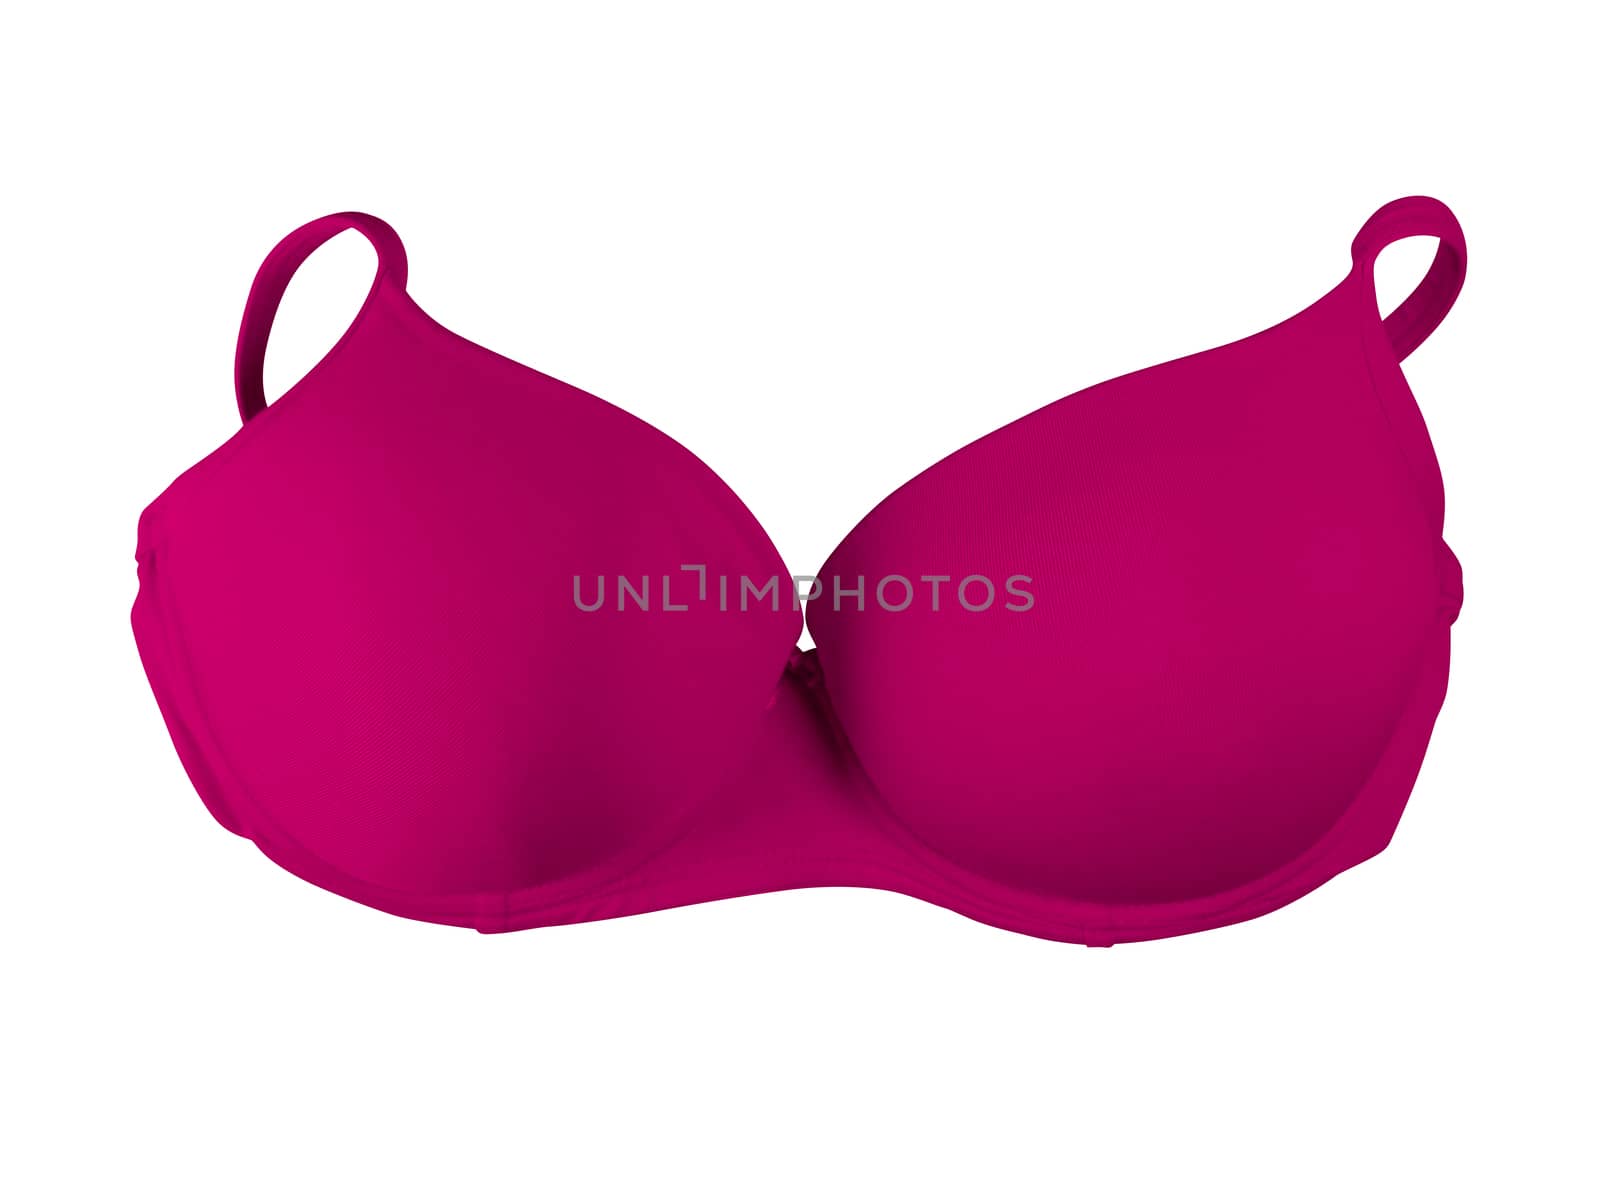 Pink brassiere isolated on white. Clipping Path included.